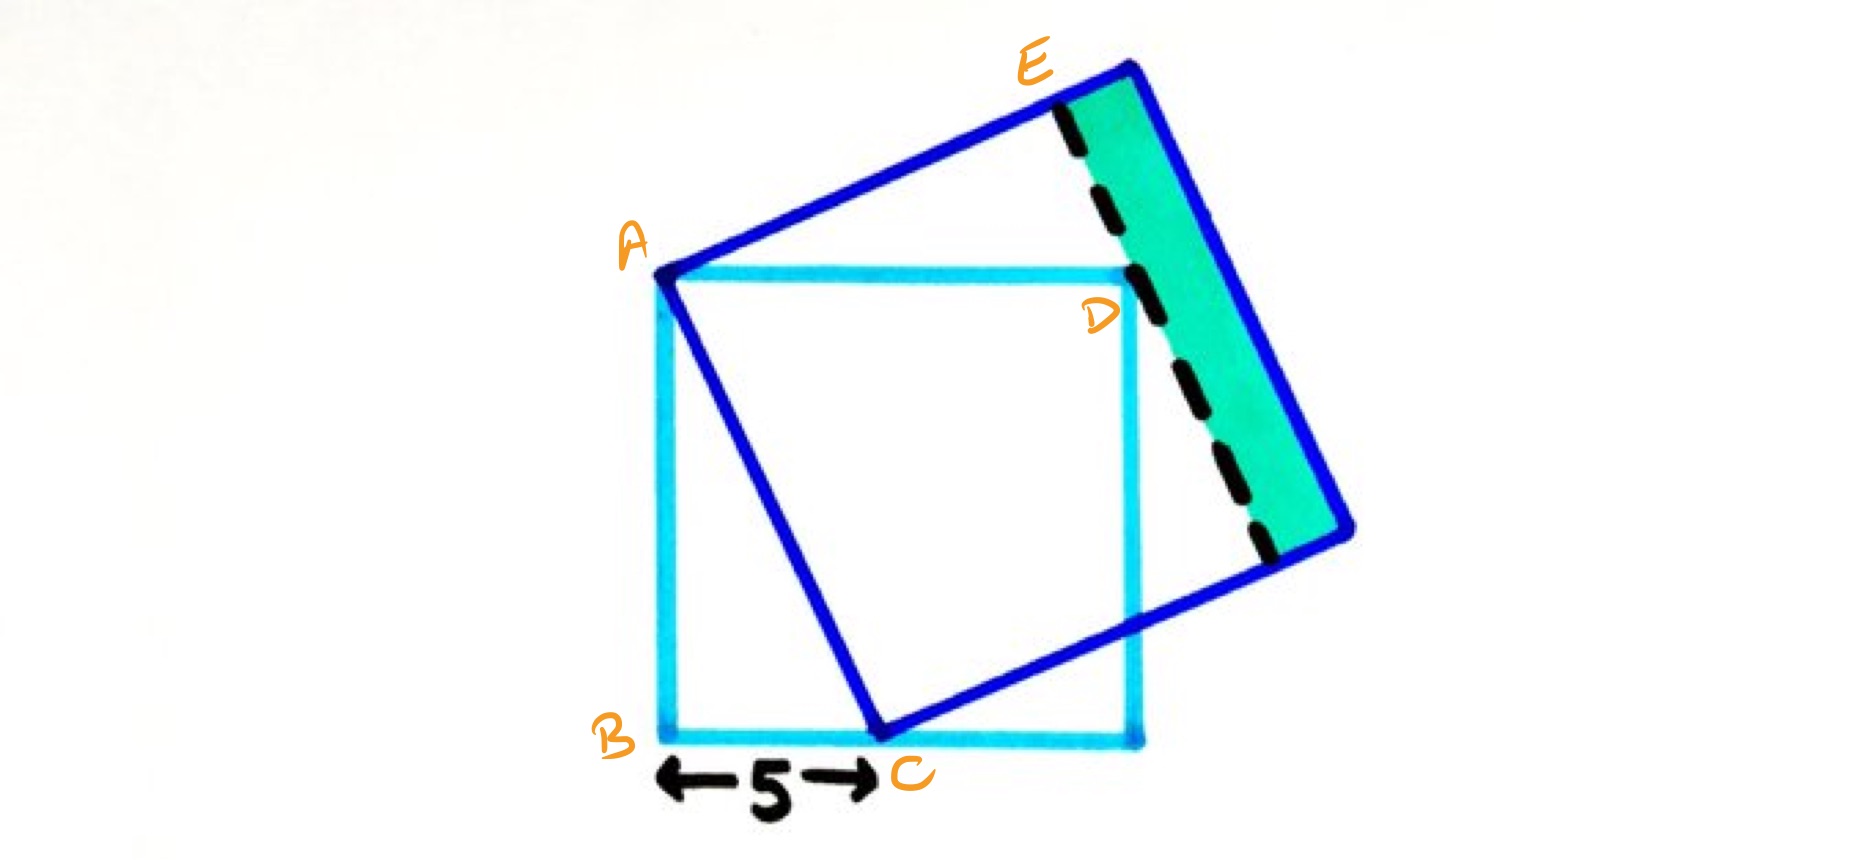 Two overlapping squares labelled